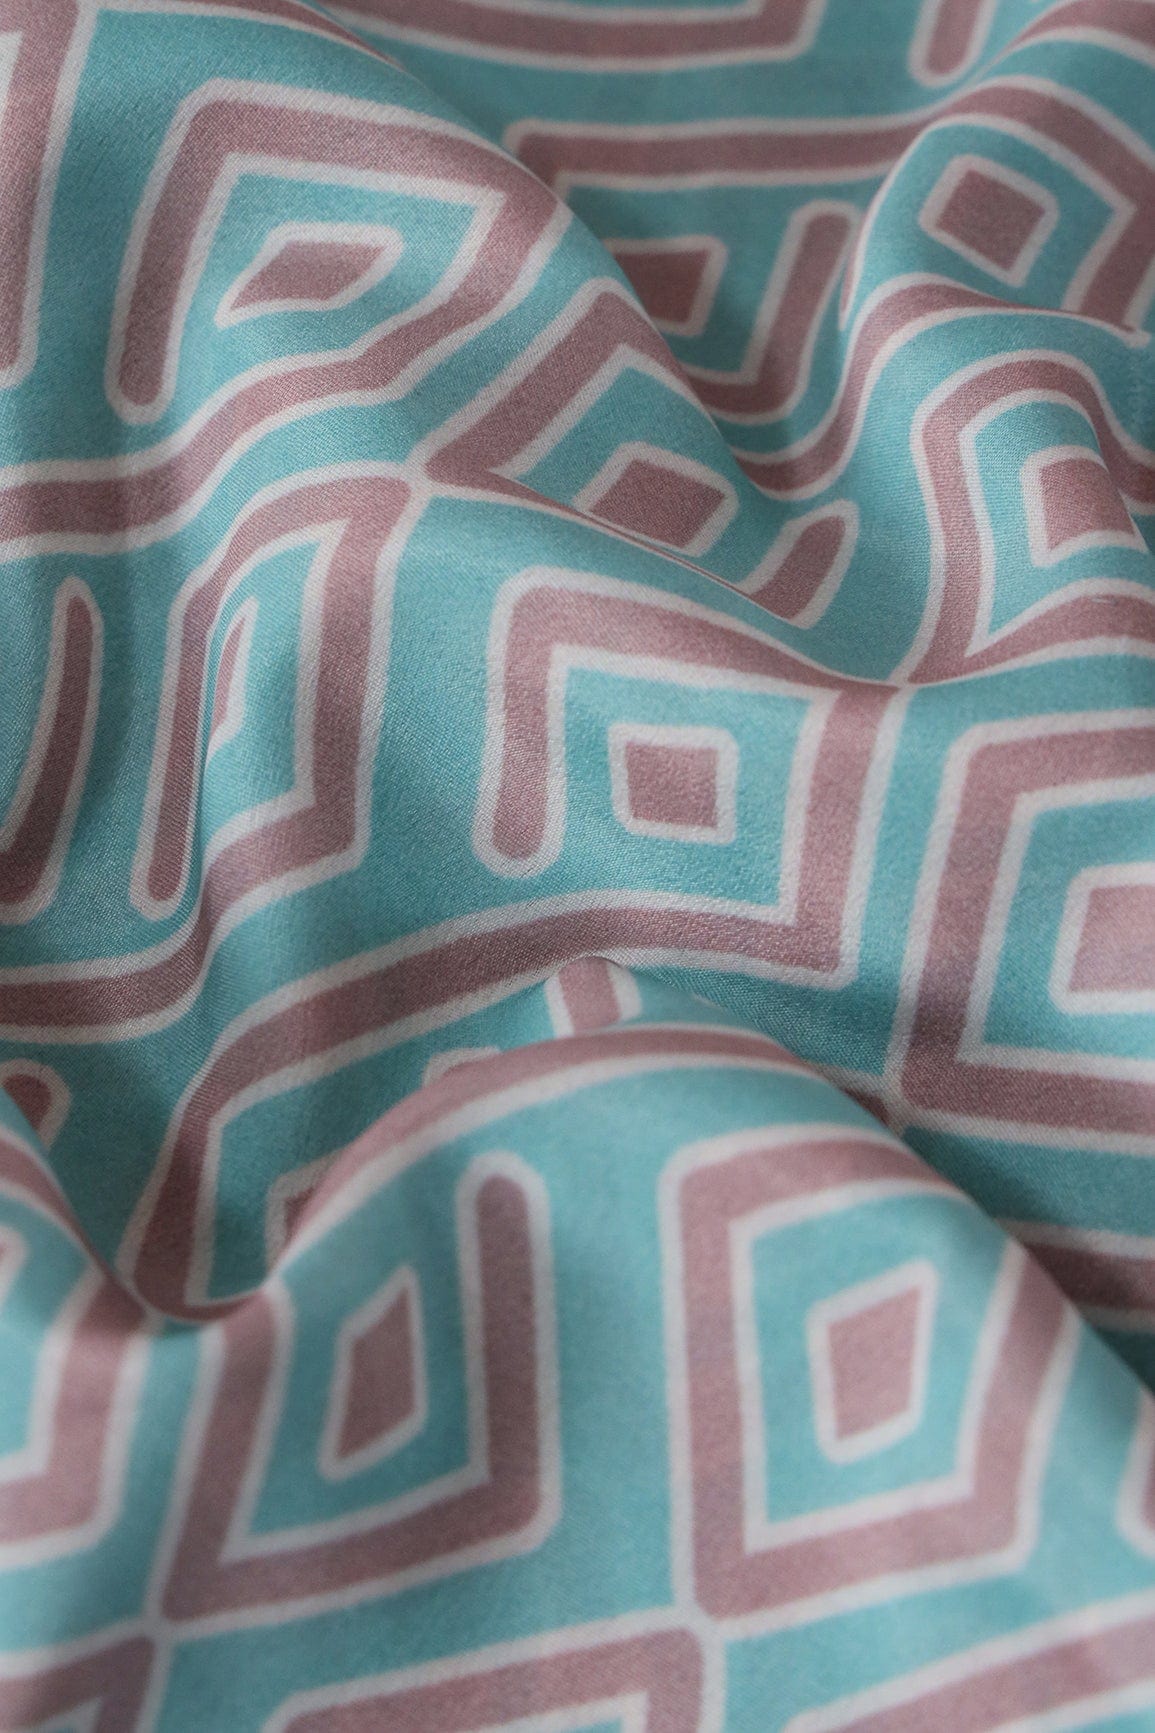 doeraa Prints Pastel Teal And Mauve Geometric Pattern Digital Print On French Crepe Fabric